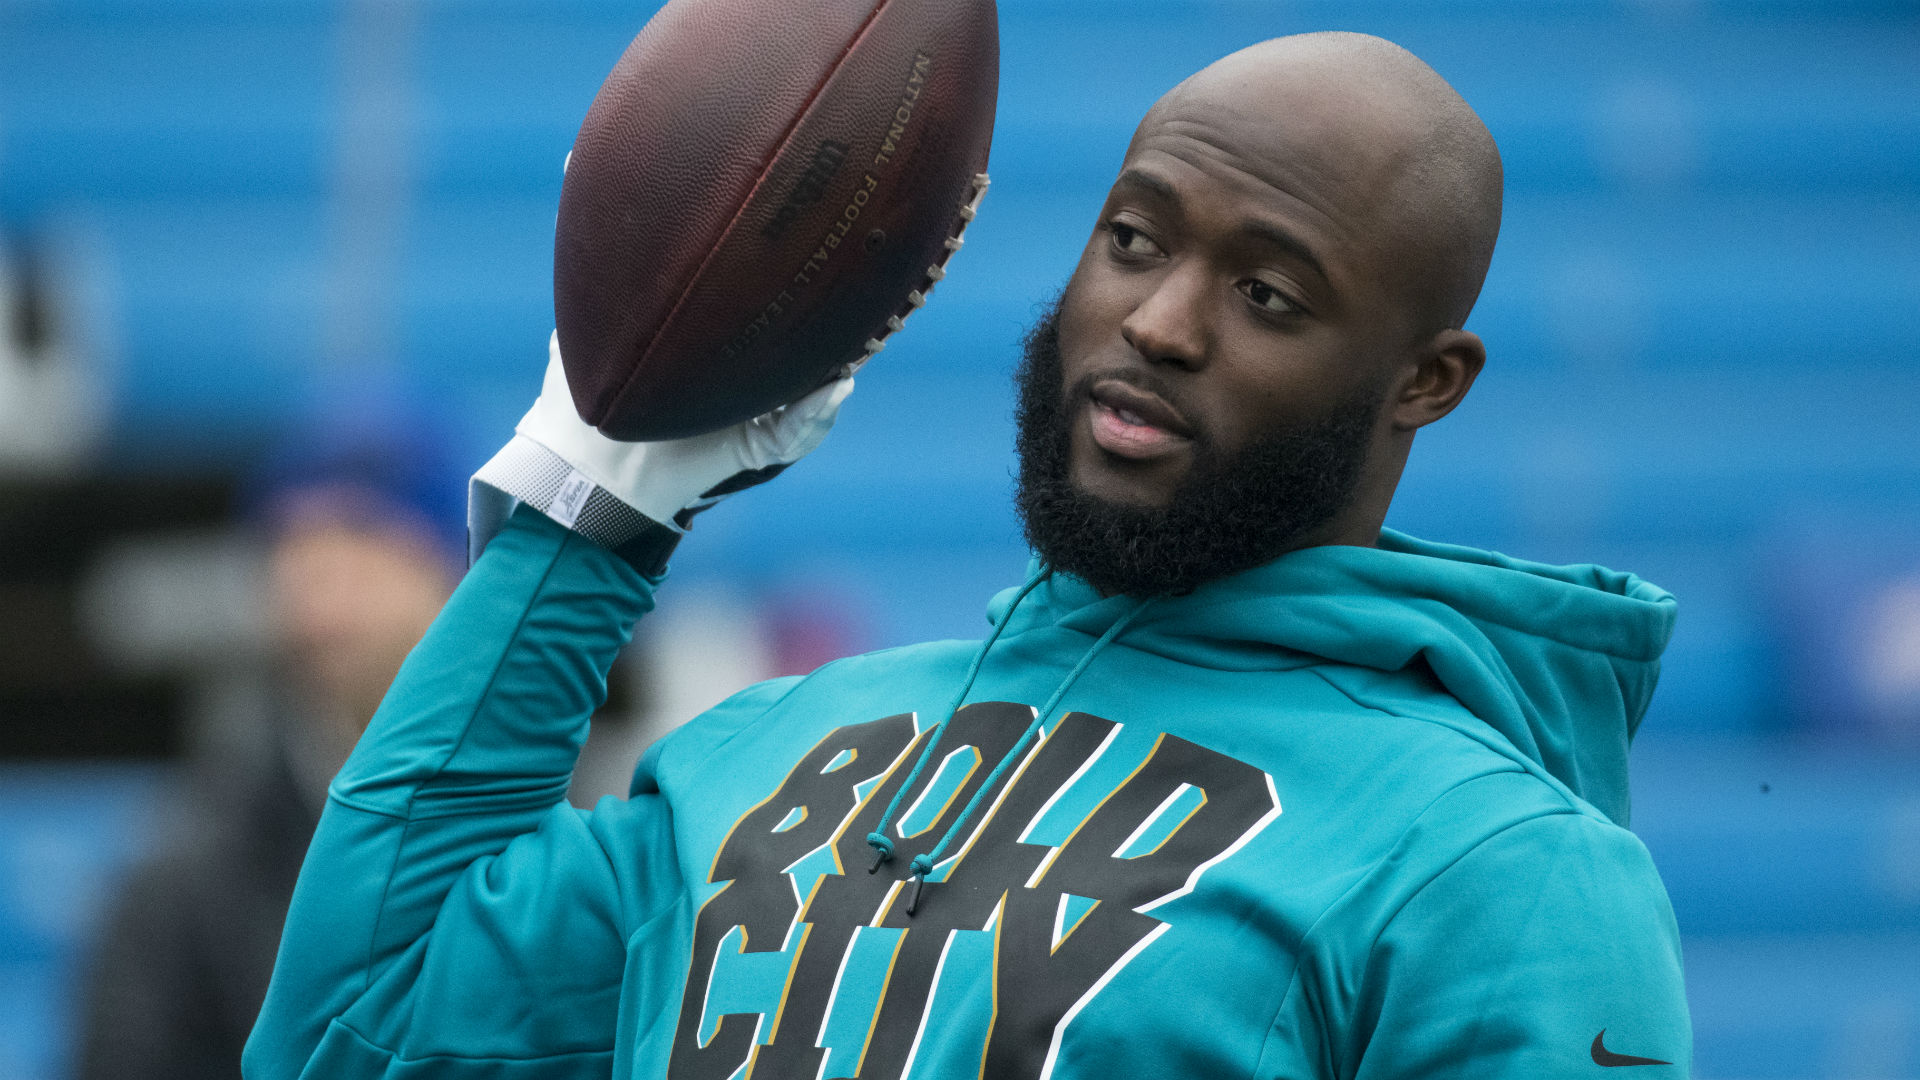 Leonard Fournette hopes the NFL campaign will serve as a reboot after an injury and suspension kept him off the field for half the year.